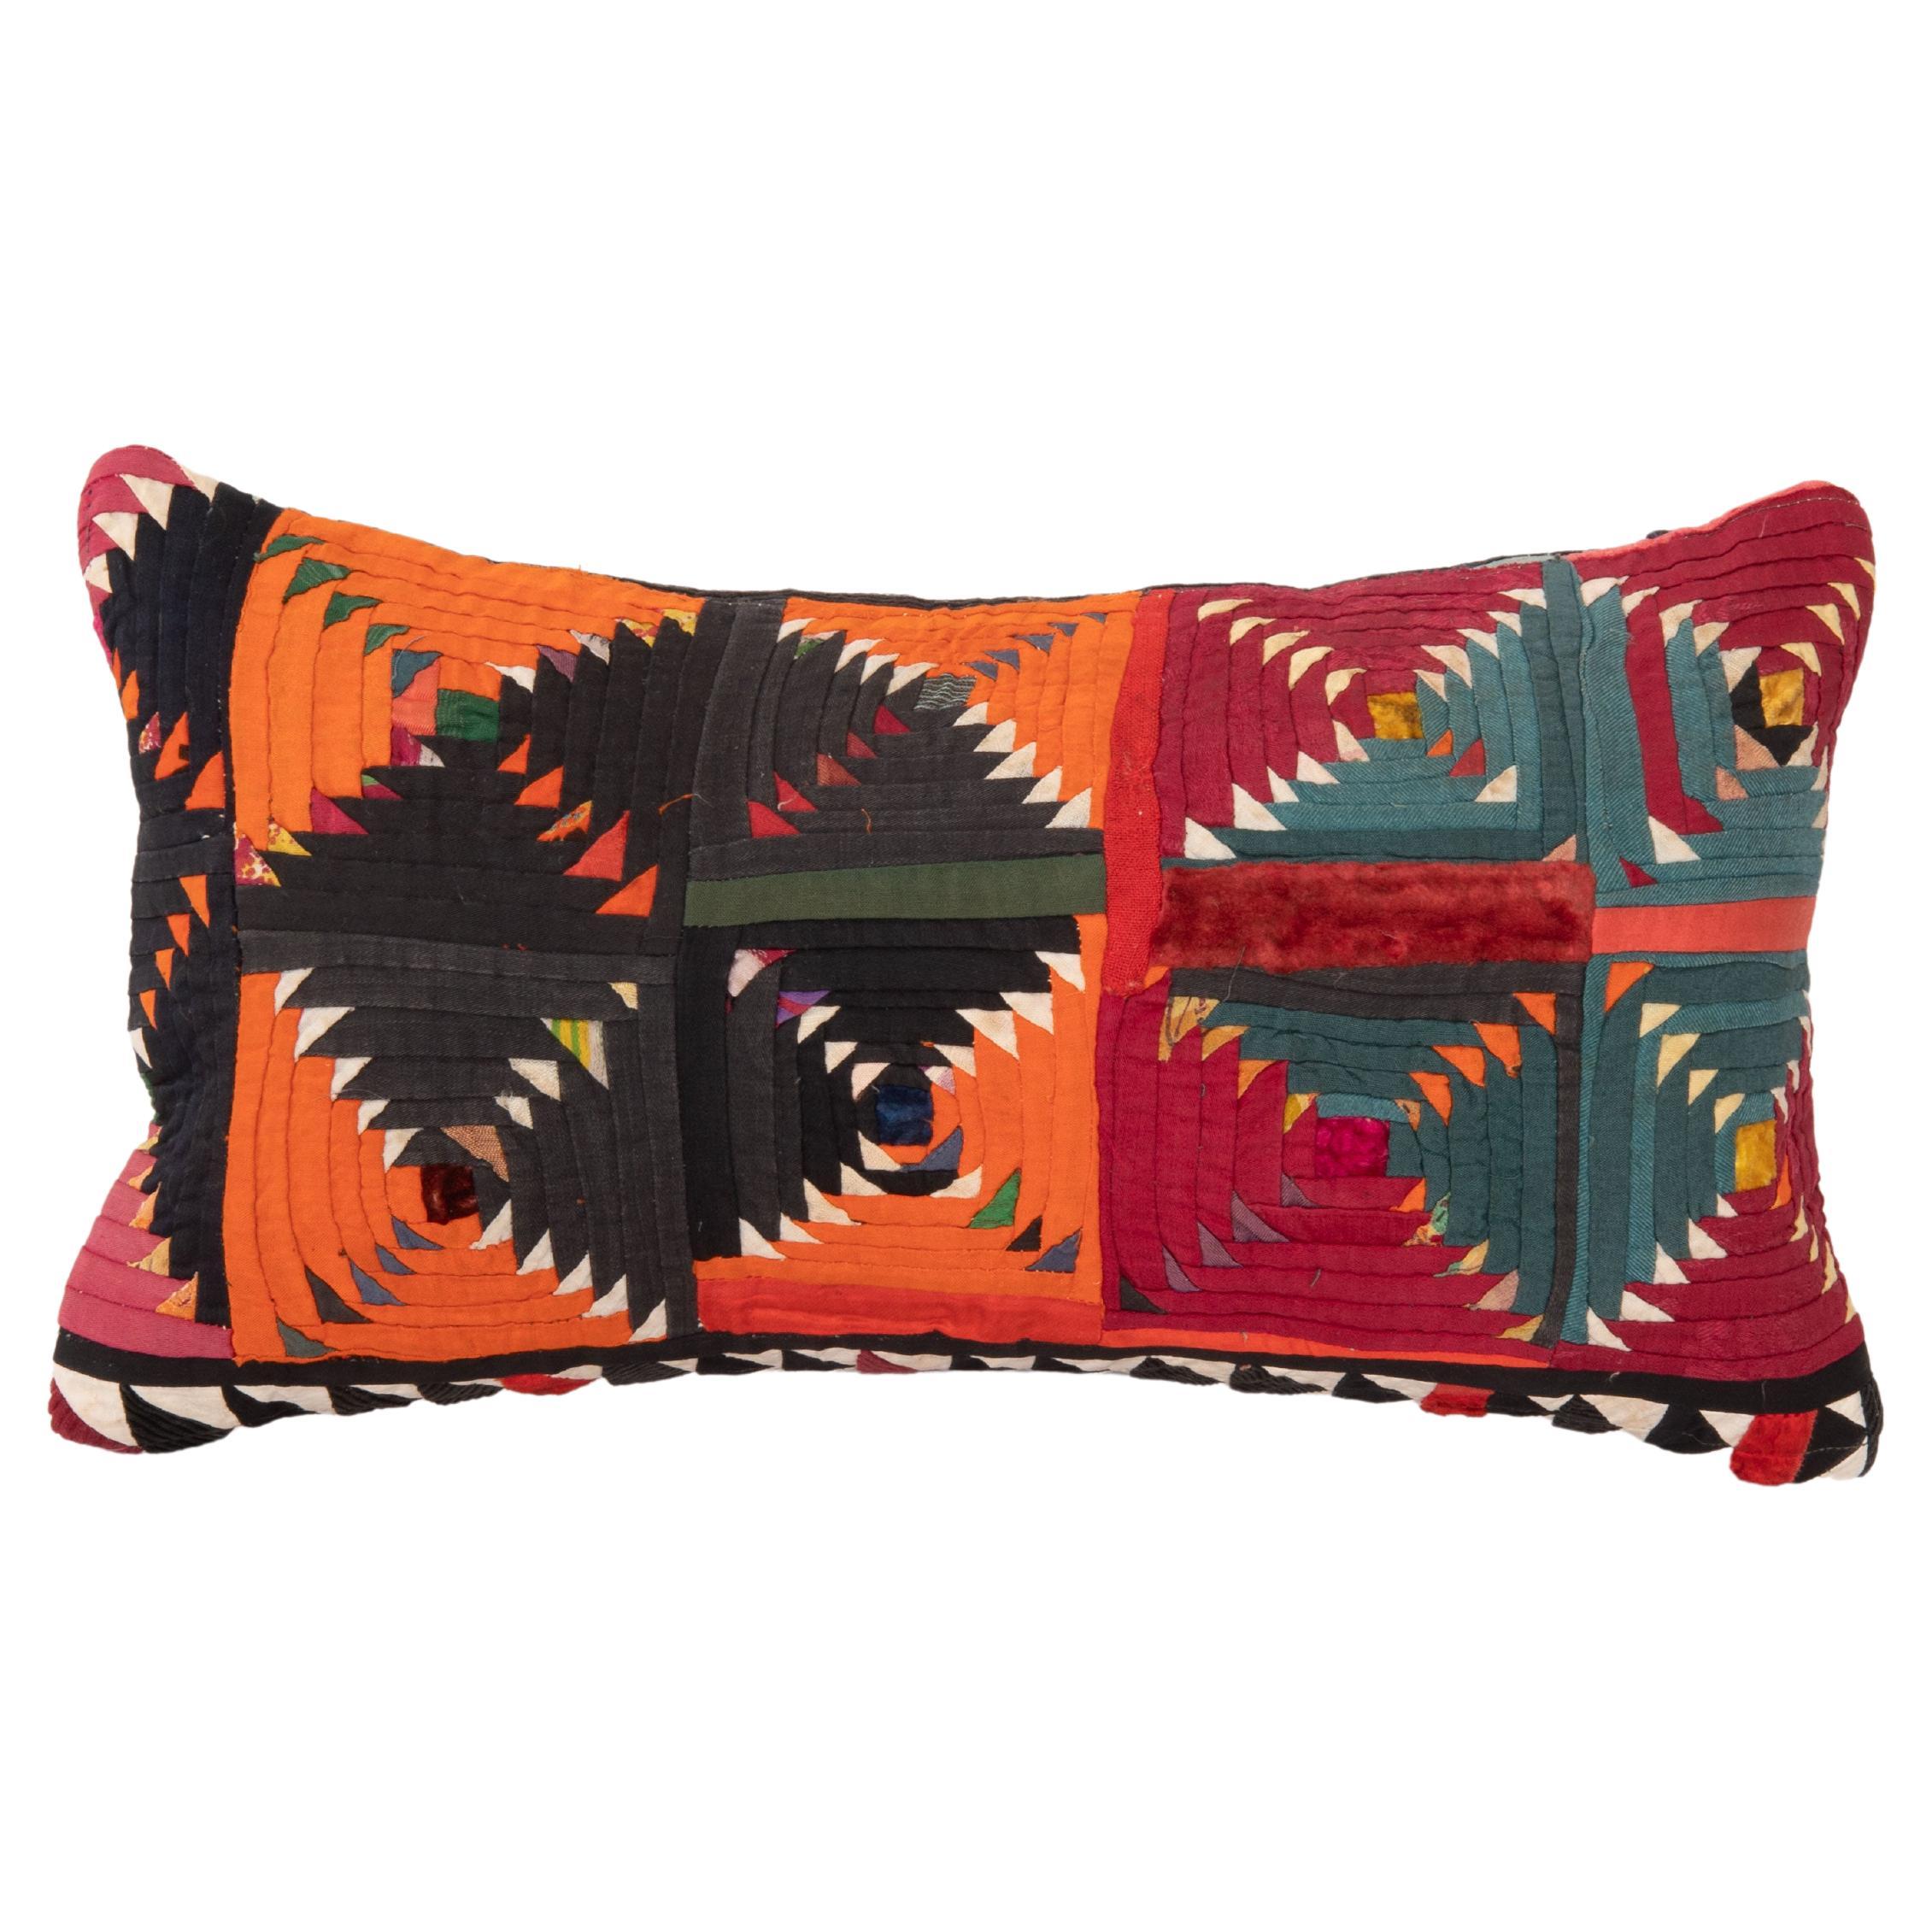 Pillow Cover Made from a Mid 20th C. Kyrgyz Korak ( Patchwork) For Sale